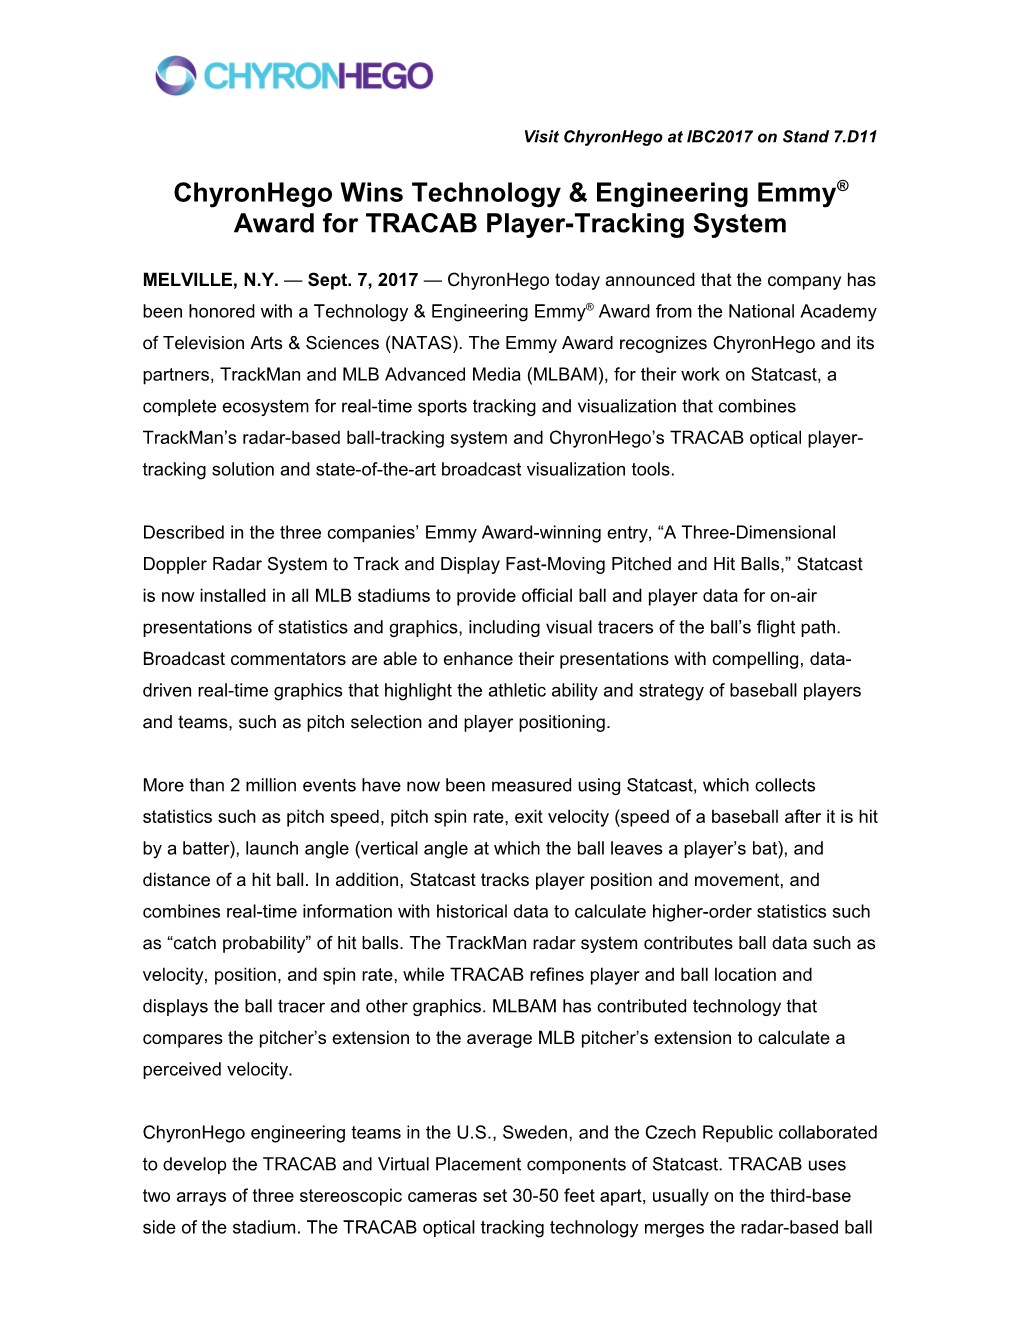 Chyronhego Wins Technology & Engineering Emmy Award for TRACAB Player-Tracking System